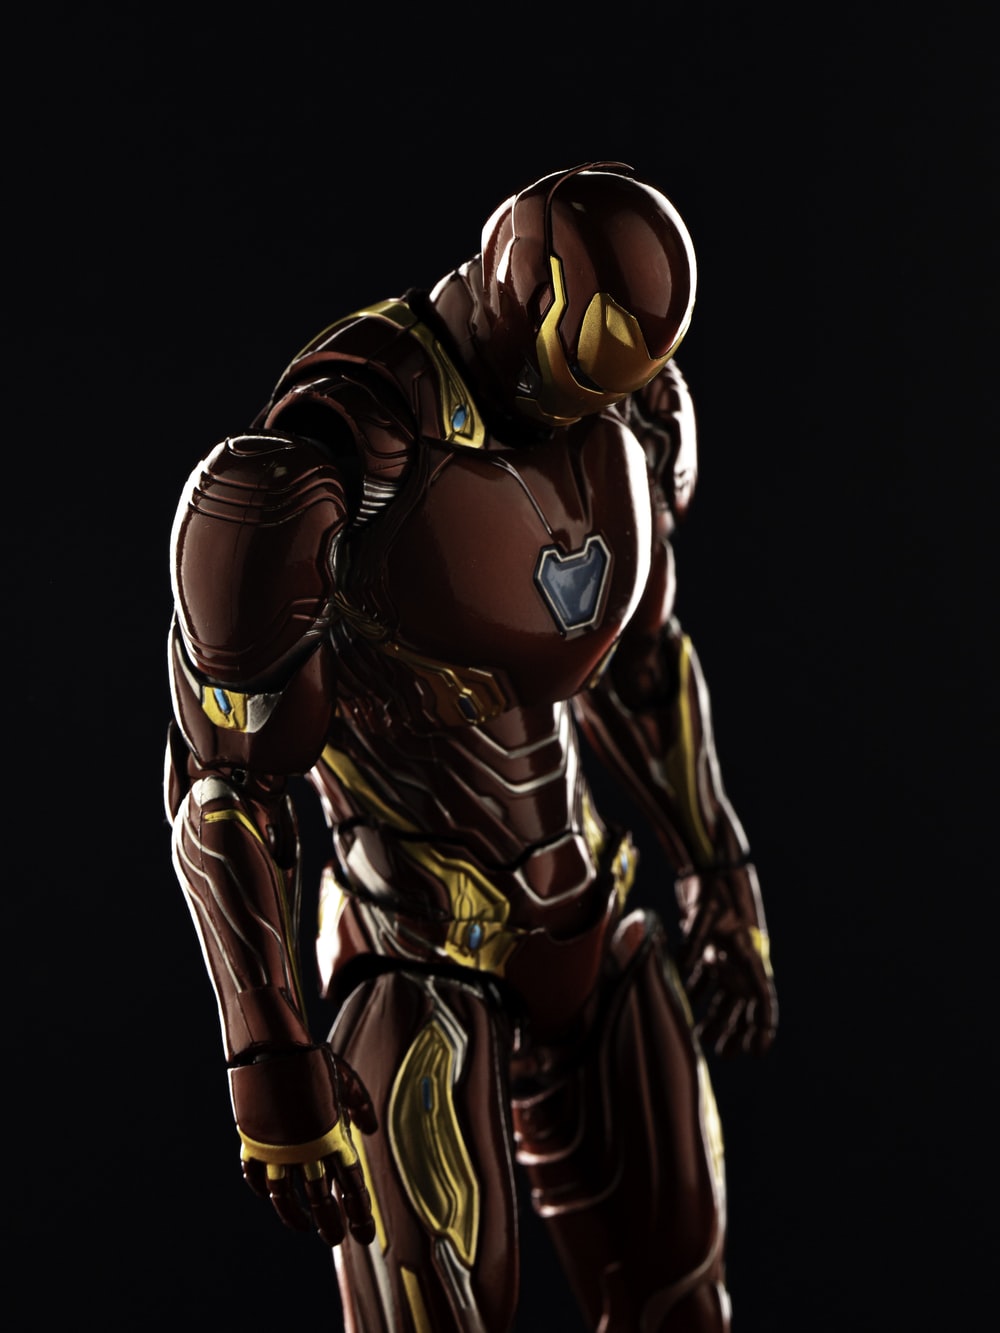 Ironman Picture. Download Free Image